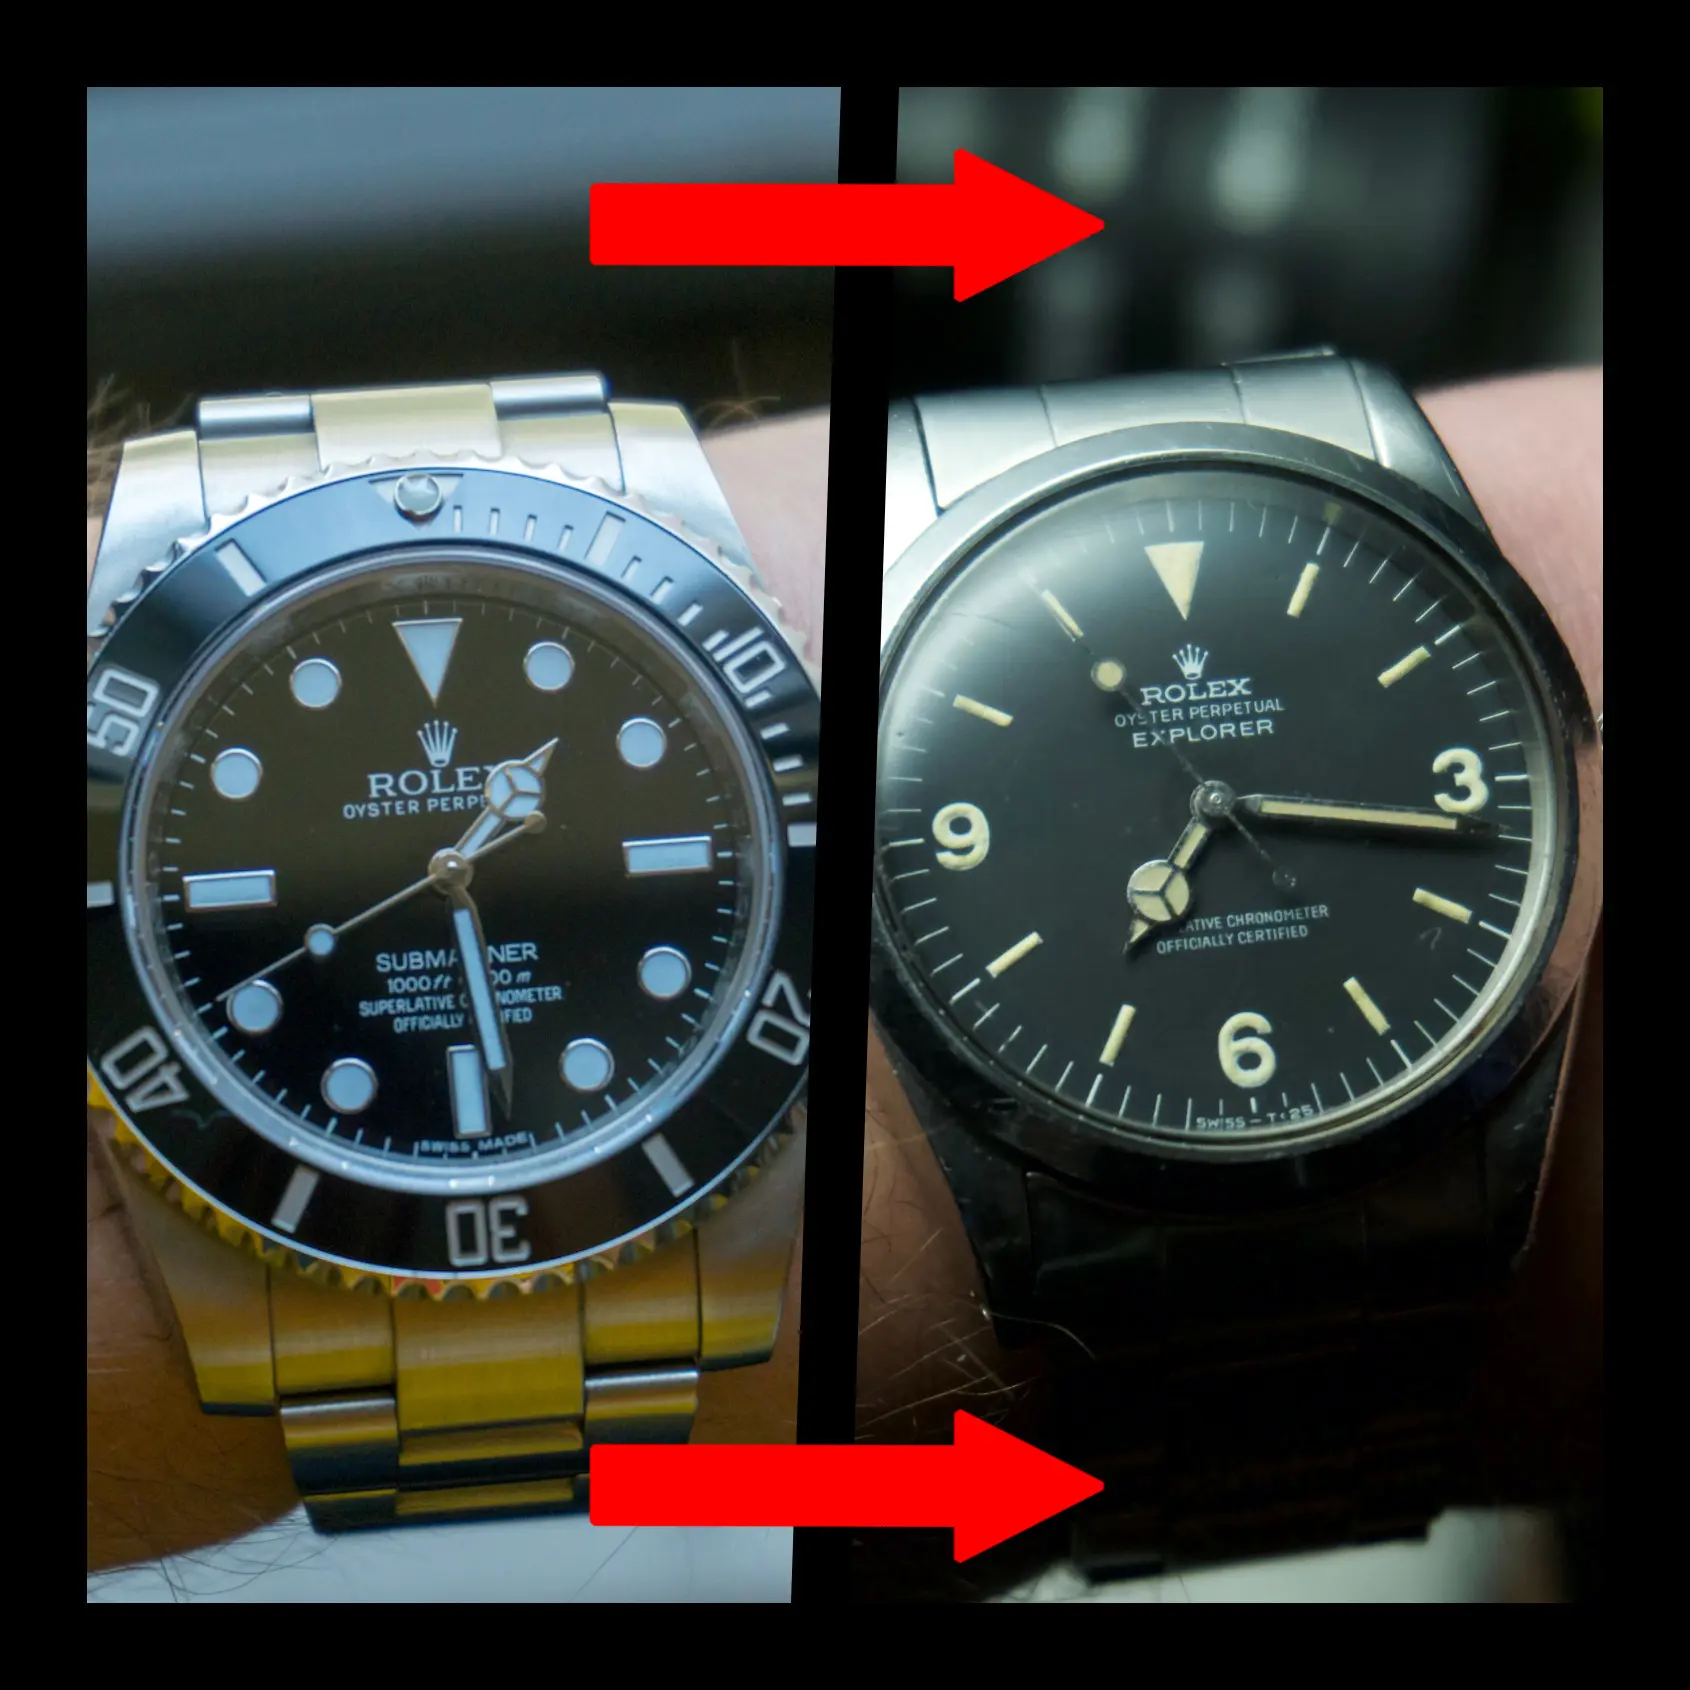 Trading Faces: A Submariner 114060 for a Rolex Explorer 1016